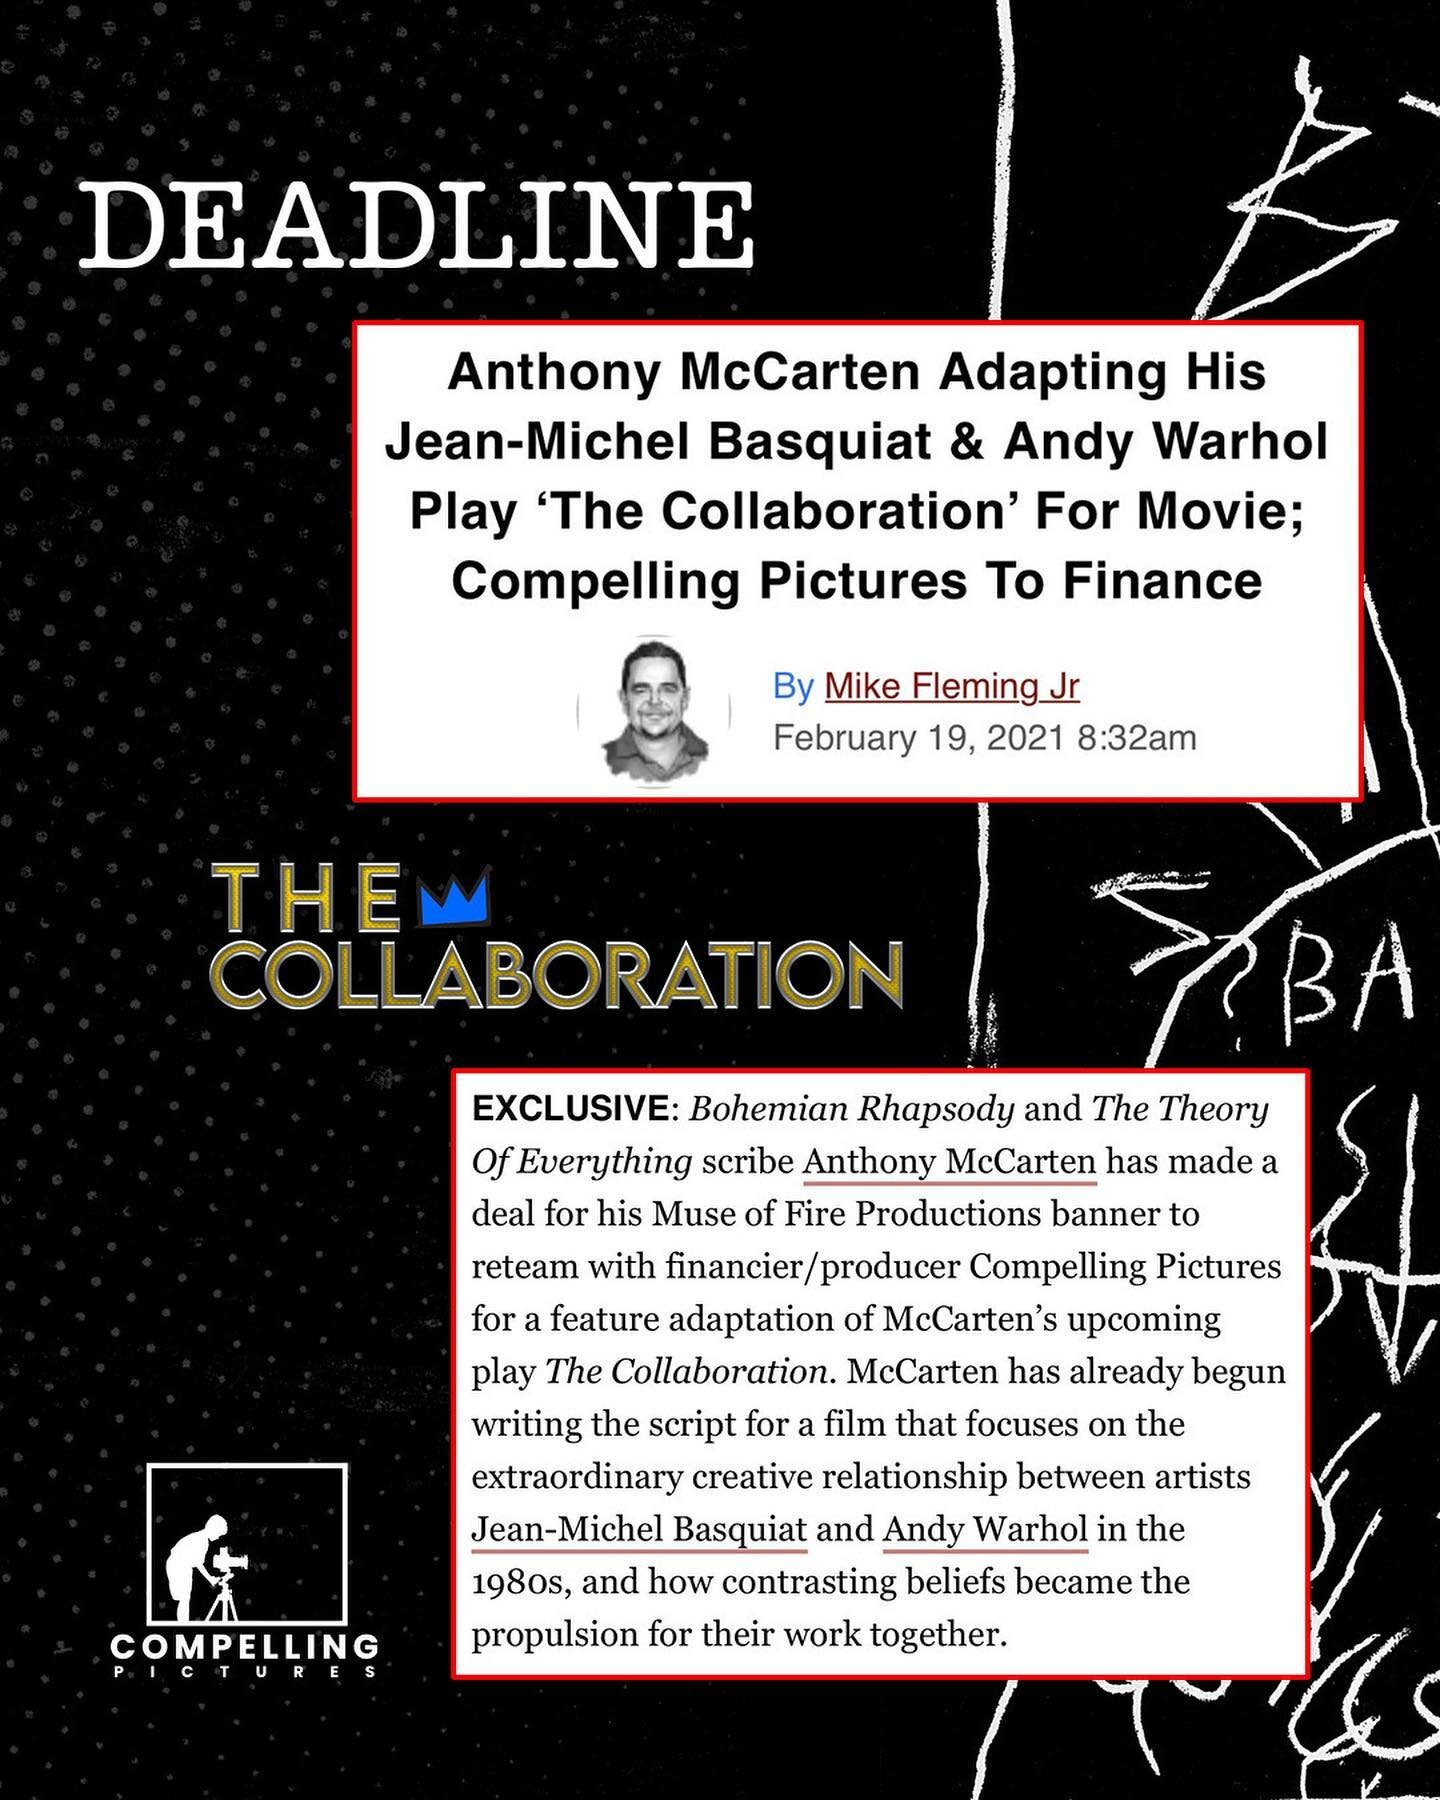 We&rsquo;re excited to share that cameras roll soon on &lsquo;The Collaboration&rsquo;. The film centers around the extraordinary creative partnership and friendship between Andy Warhol and Jean-Michel Basquiat in the 1980s, and how their contrasting